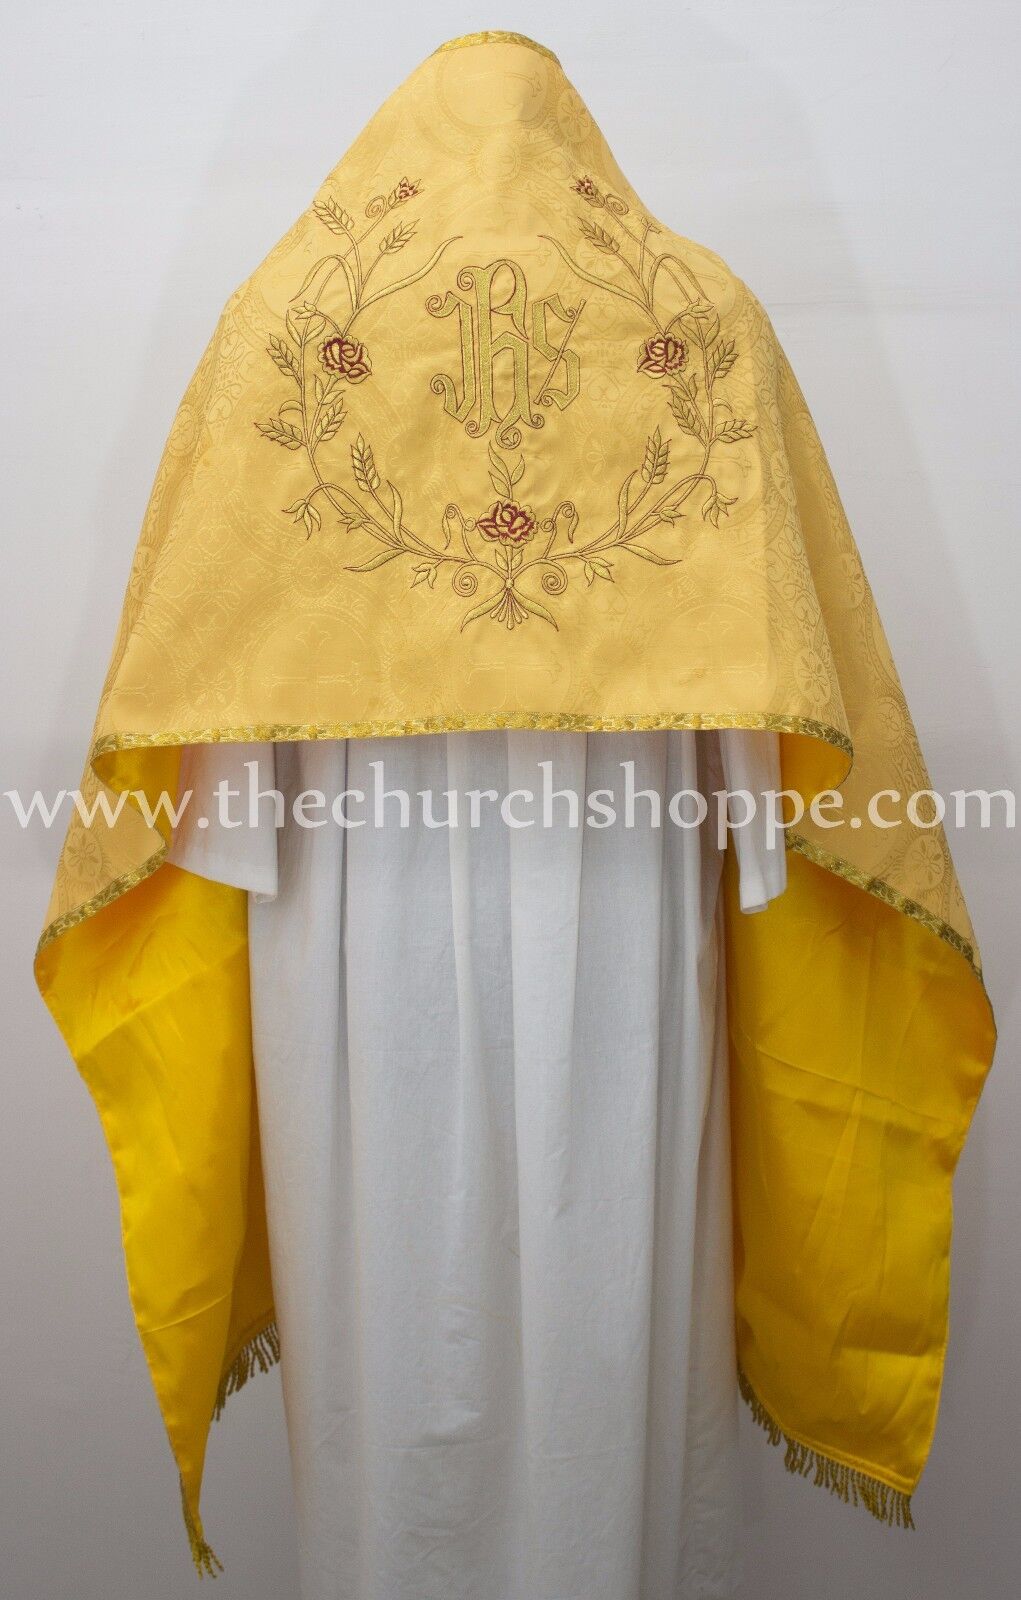 New Yellow Humeral Veil with IHS embroidery,voile huméral,velo omerale